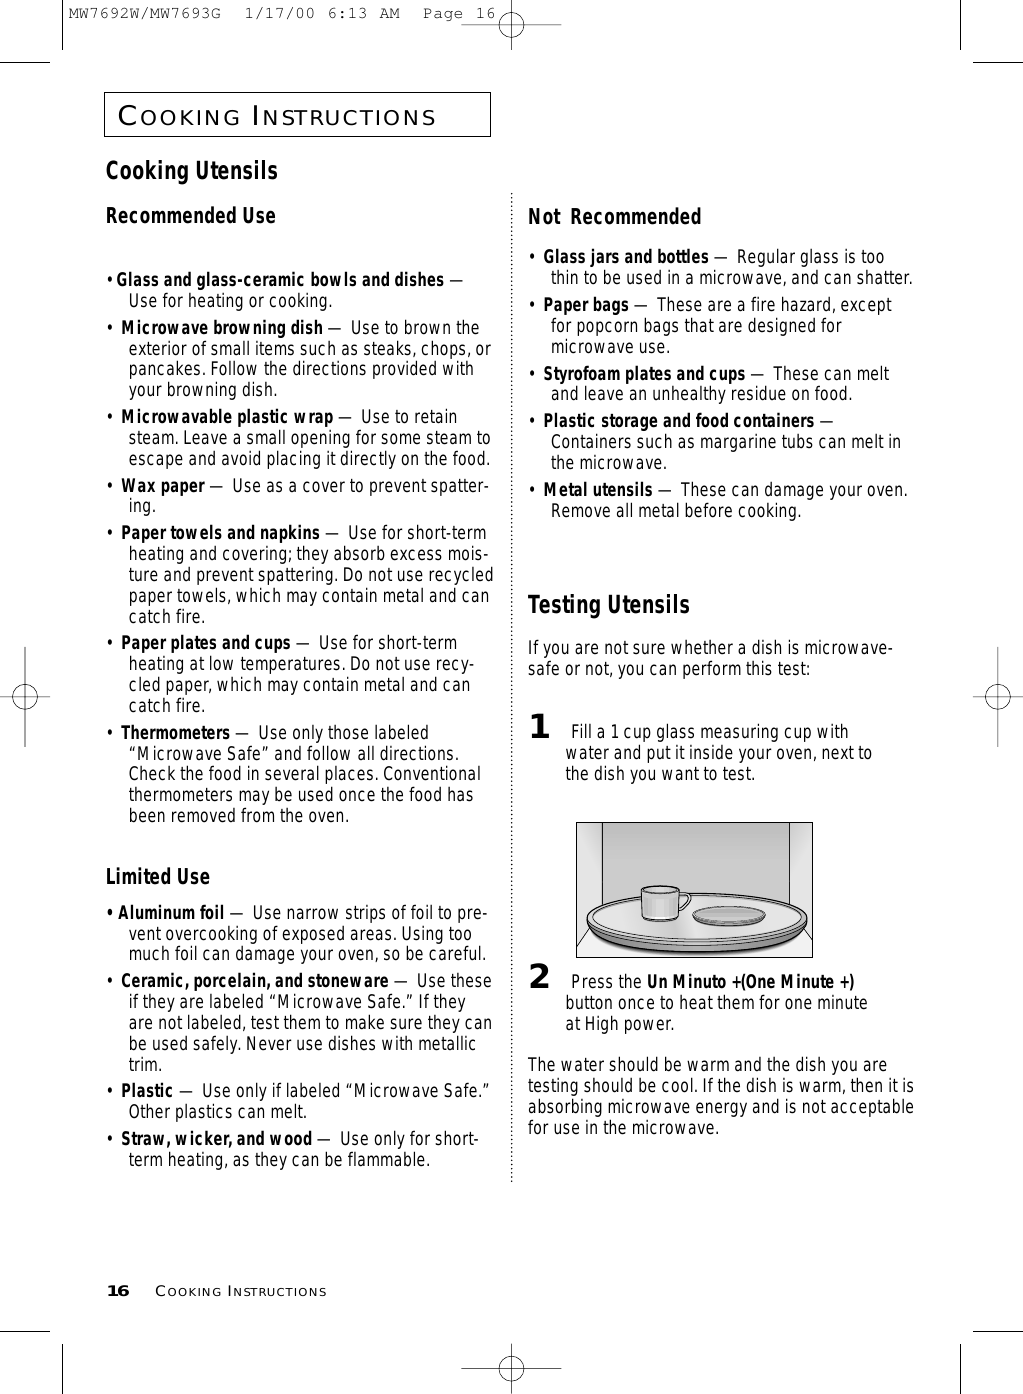 COOKINGINSTRUCTIONS16 COOKINGINSTRUCTIONSCooking UtensilsRecommended Use• Glass and glass-ceramic bowls and dishes —Use for heating or cooking.•  Microwave browning dish — Use to brown theexterior of small items such as steaks, chops, orpancakes. Follow the directions provided withyour browning dish.•  Microwavable plastic wrap — Use to retainsteam. Leave a small opening for some steam toescape and avoid placing it directly on the food.•  Wax paper — Use as a cover to prevent spatter-ing.•  Paper towels and napkins — Use for short-termheating and covering; they absorb excess mois-ture and prevent spattering. Do not use recycledpaper towels, which may contain metal and cancatch fire.•  Paper plates and cups — Use for short-termheating at low temperatures. Do not use recy-cled paper, which may contain metal and cancatch fire.•  Thermometers — Use only those labeled“Microwave Safe” and follow all directions.Check the food in several places. Conventionalthermometers may be used once the food hasbeen removed from the oven.Limited Use• Aluminum foil — Use narrow strips of foil to pre-vent overcooking of exposed areas. Using toomuch foil can damage your oven, so be careful.•  Ceramic, porcelain, and stoneware — Use theseif they are labeled “Microwave Safe.” If theyare not labeled, test them to make sure they canbe used safely. Never use dishes with metallictrim.•  Plastic — Use only if labeled “Microwave Safe.”Other plastics can melt.•  Straw, wicker, and wood — Use only for short-term heating, as they can be flammable.Not  Recommended•  Glass jars and bottles — Regular glass is toothin to be used in a microwave, and can shatter.•  Paper bags — These are a fire hazard, exceptfor popcorn bags that are designed formicrowave use.•  Styrofoam plates and cups — These can meltand leave an unhealthy residue on food.•  Plastic storage and food containers —Containers such as margarine tubs can melt inthe microwave.•  Metal utensils — These can damage your oven.Remove all metal before cooking. Testing UtensilsIf you are not sure whether a dish is microwave-safe or not, you can perform this test:1Fill a 1 cup glass measuring cup withwater and put it inside your oven, next tothe dish you want to test.2Press the Un Minuto +(One Minute +)button once to heat them for one minuteat High power.The water should be warm and the dish you aretesting should be cool. If the dish is warm, then it isabsorbing microwave energy and is not acceptablefor use in the microwave.MW7692W/MW7693G  1/17/00 6:13 AM  Page 16